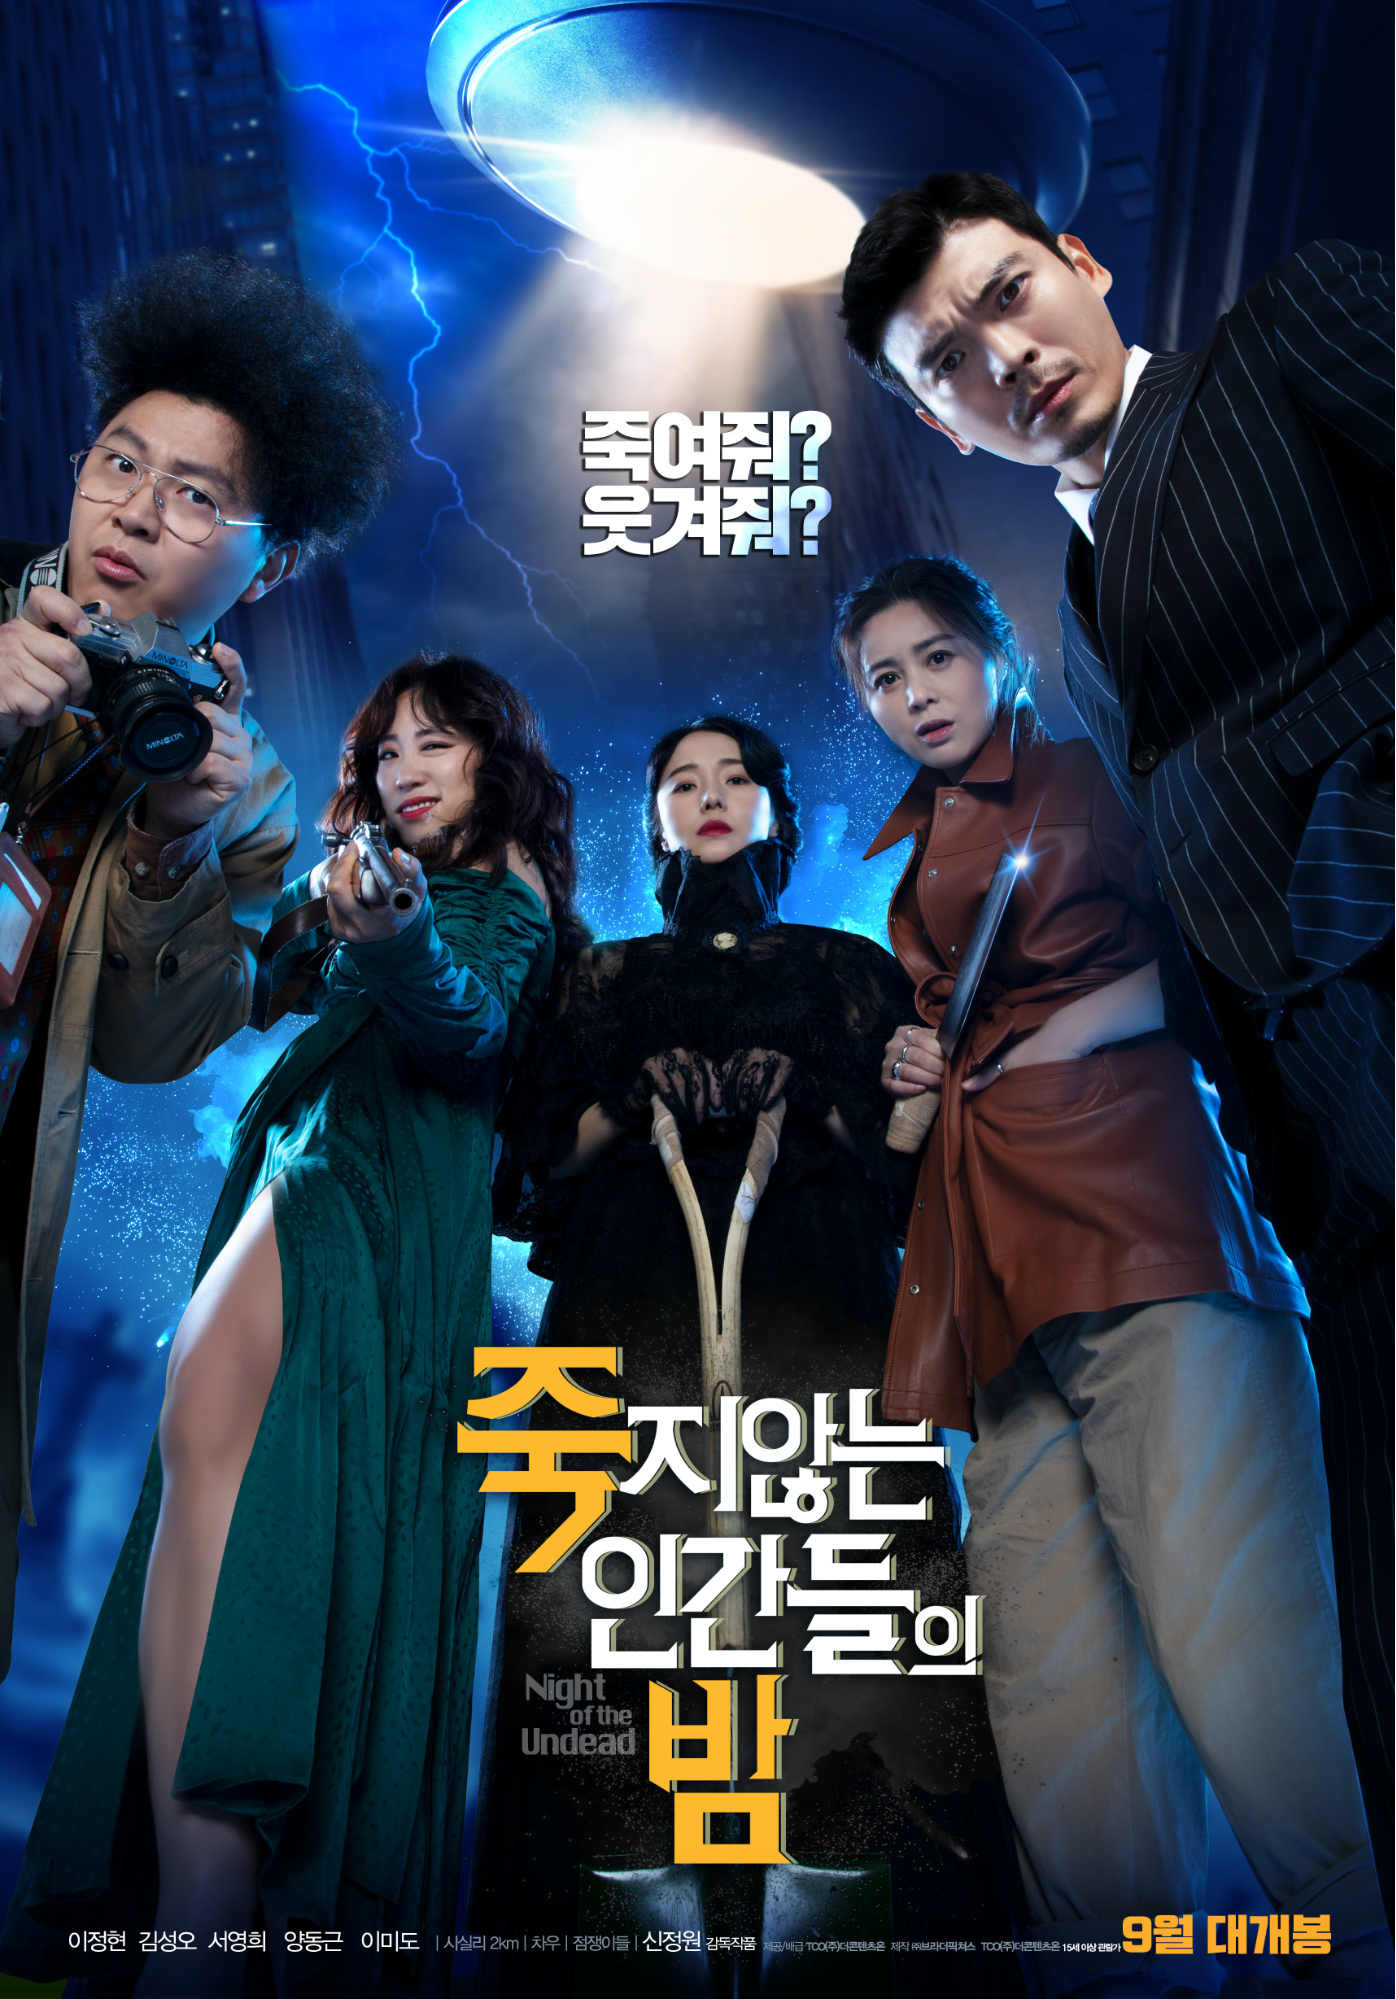 Upcoming Korean Movies 2020 - The Night of The Undead 죽지않는 인간들의 밤